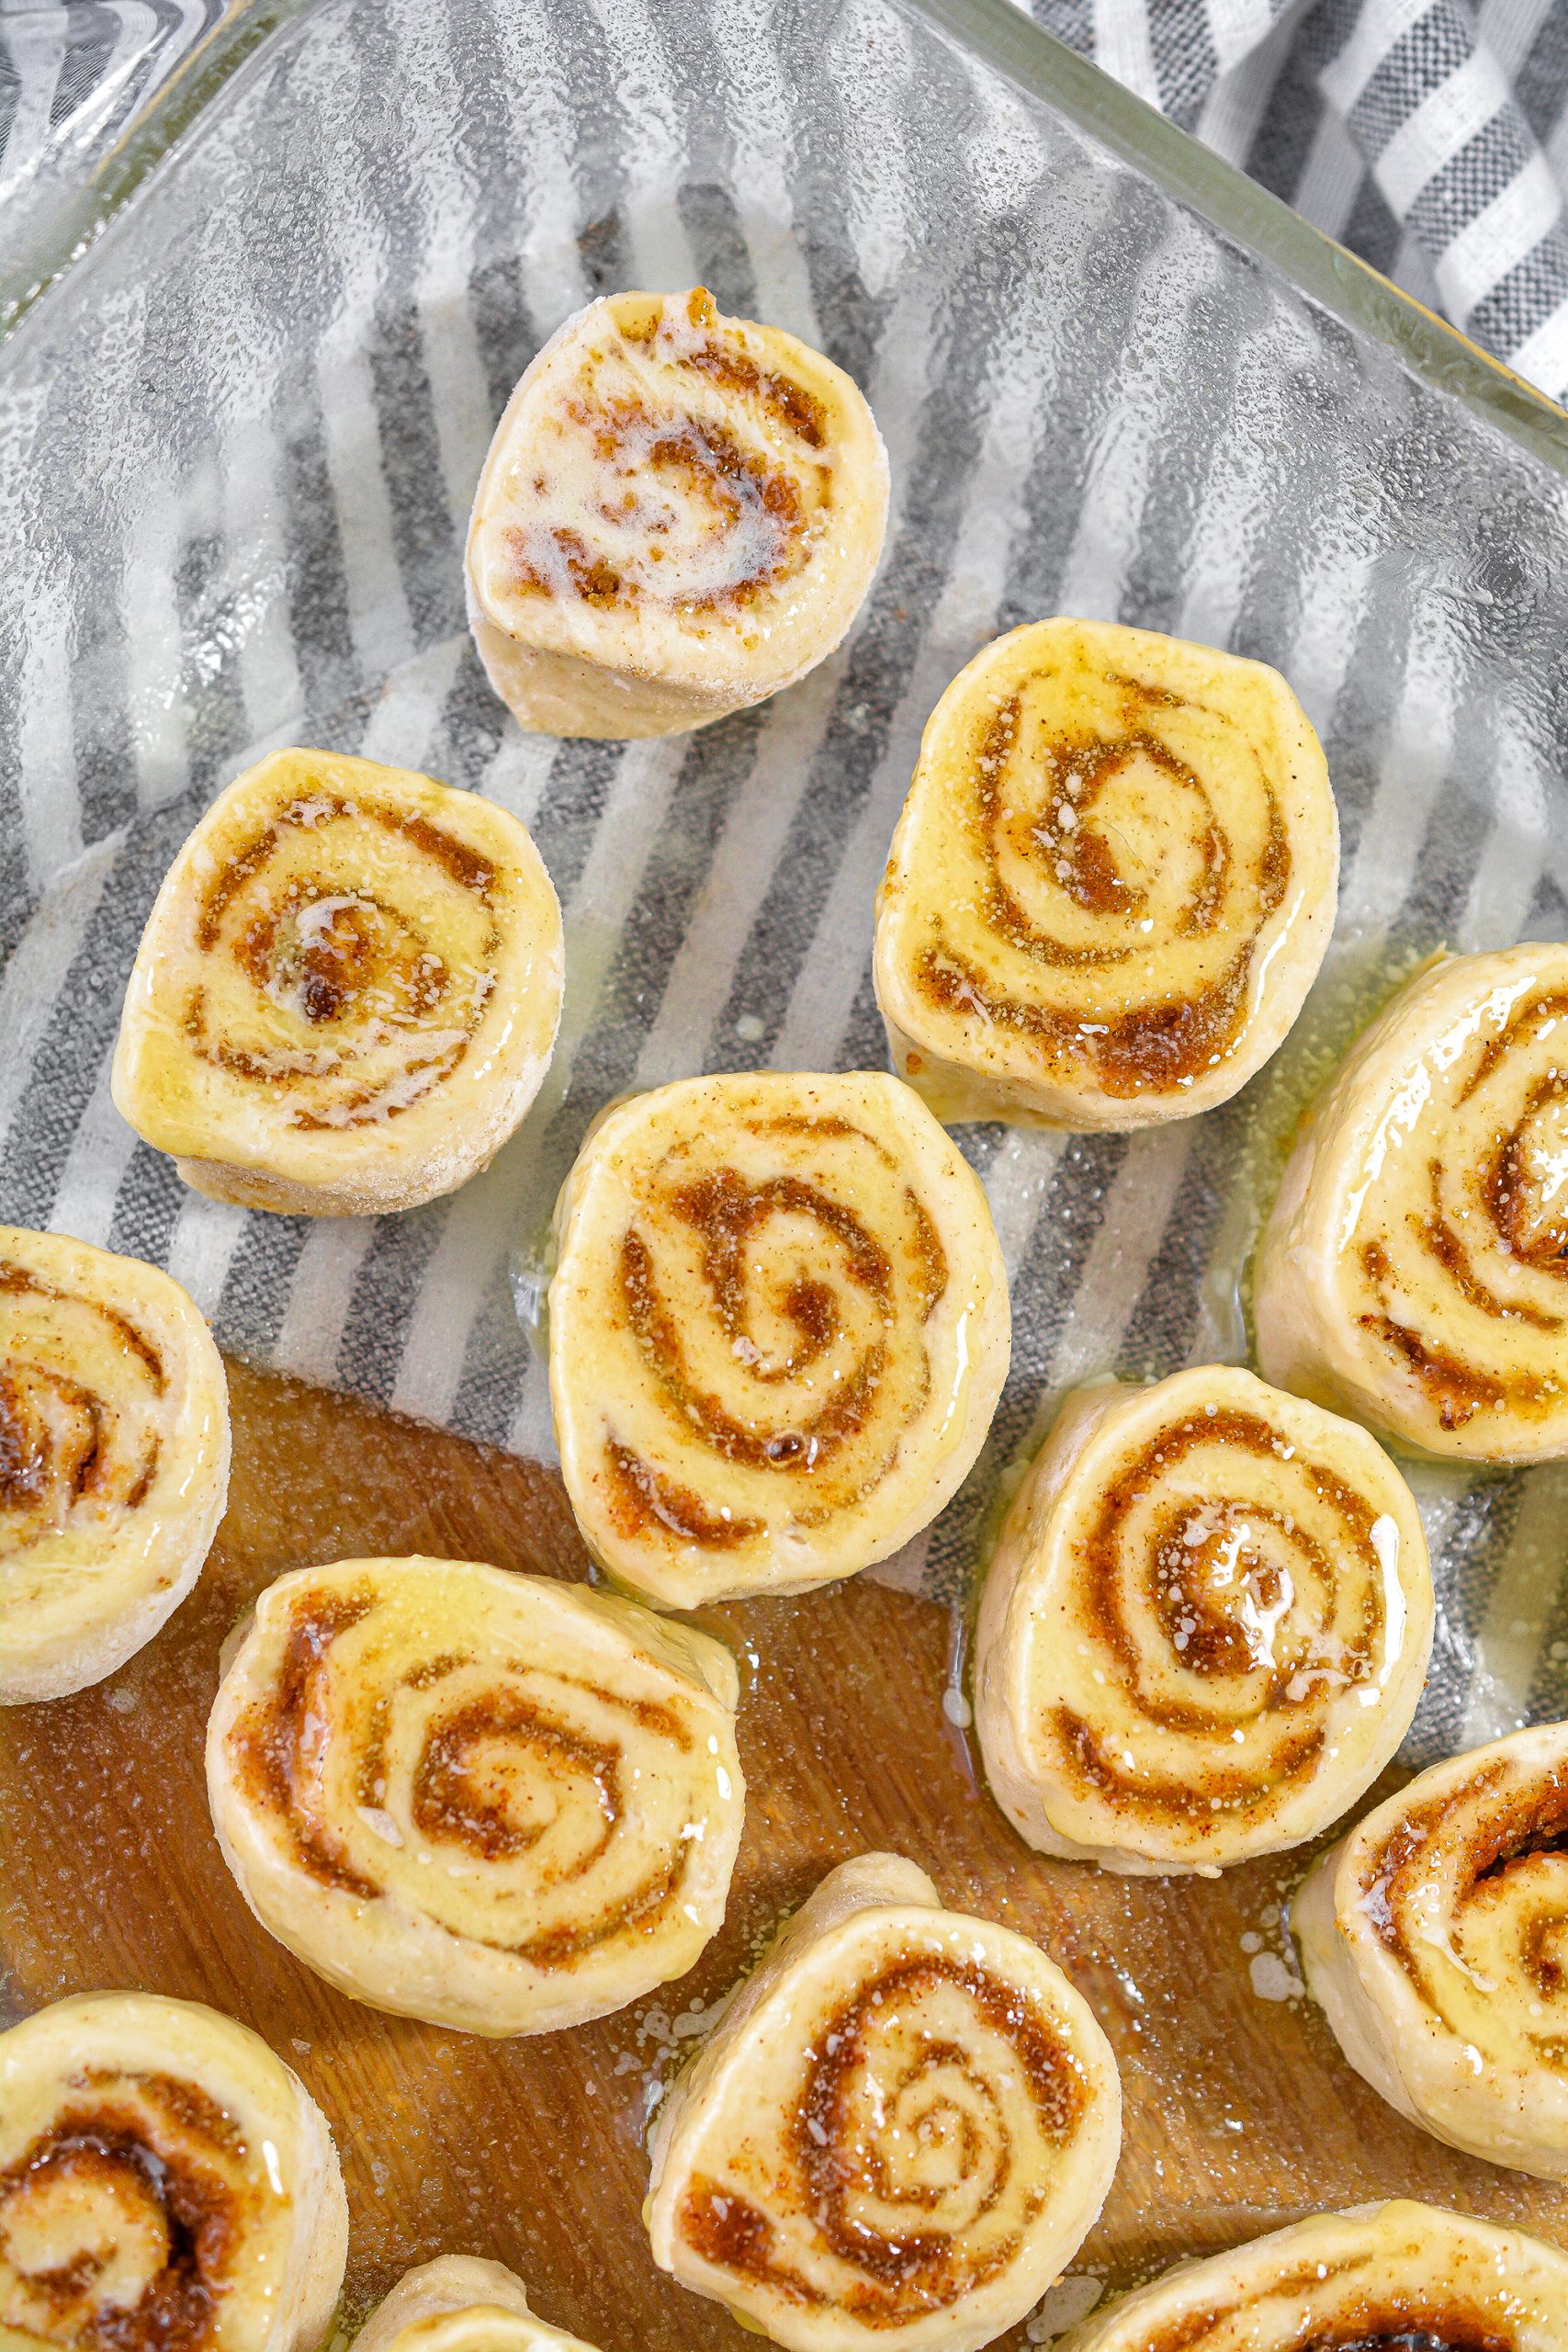 Brush the rolls with the remaining melted butter.